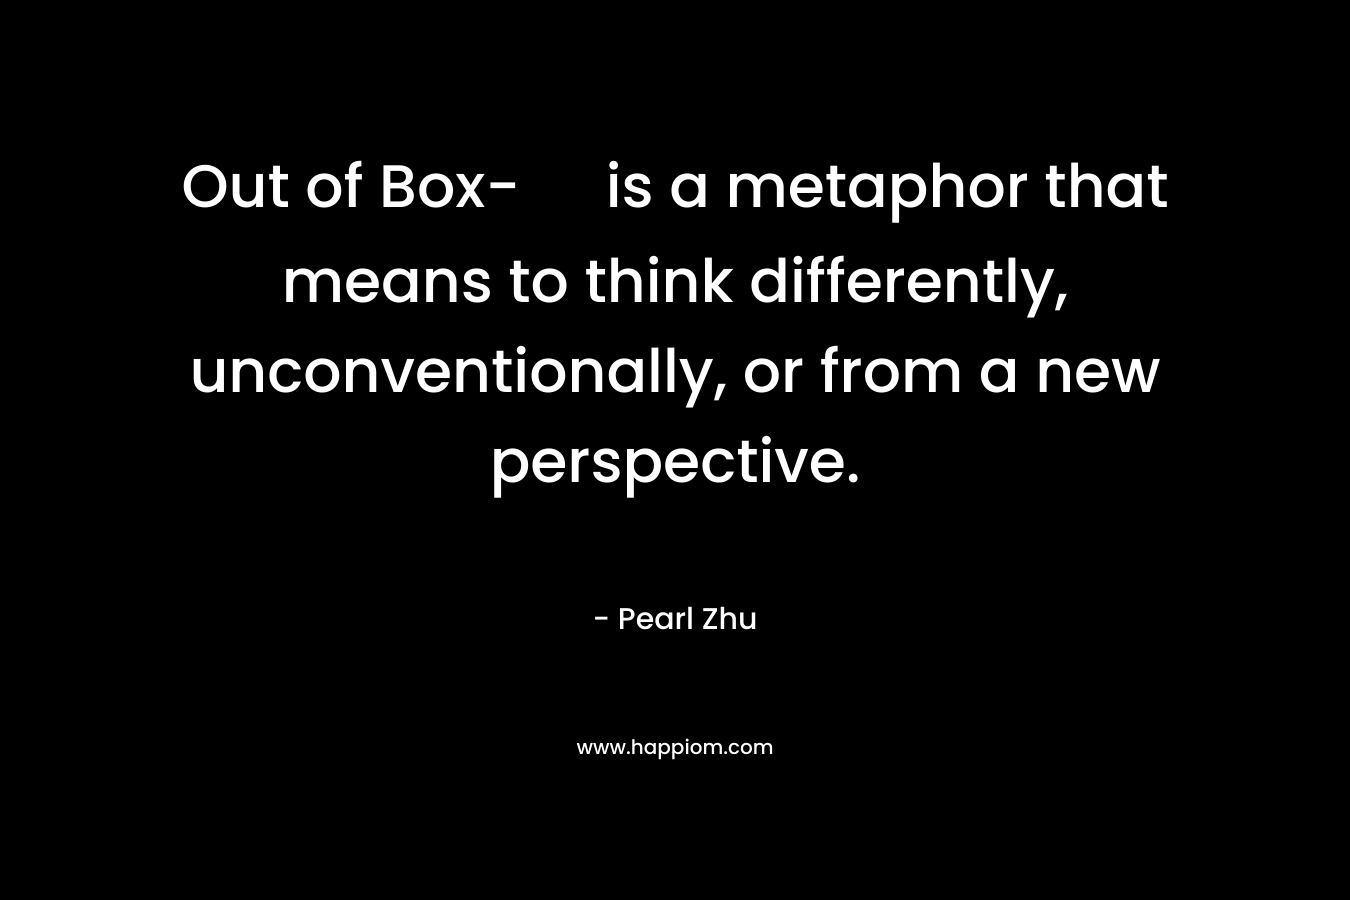 Out of Box- is a metaphor that means to think differently, unconventionally, or from a new perspective.